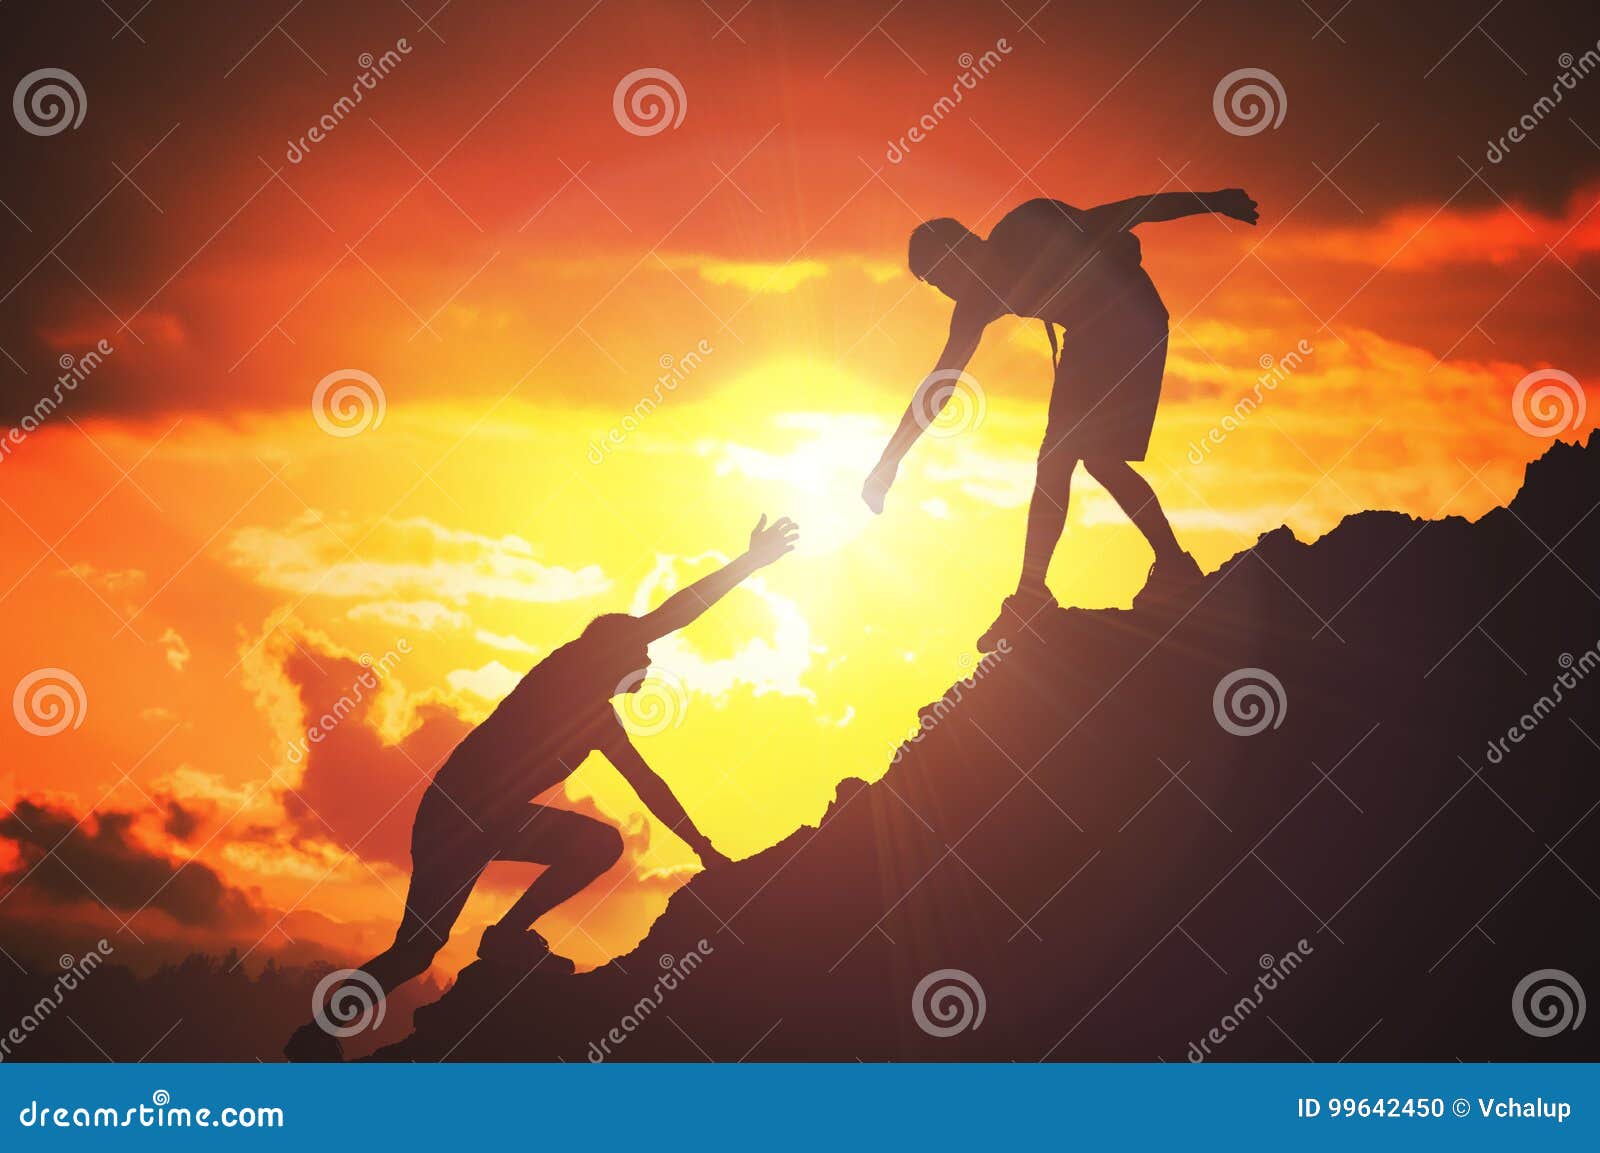 man is giving helping hand. silhouettes of people climbing on mountain at sunset